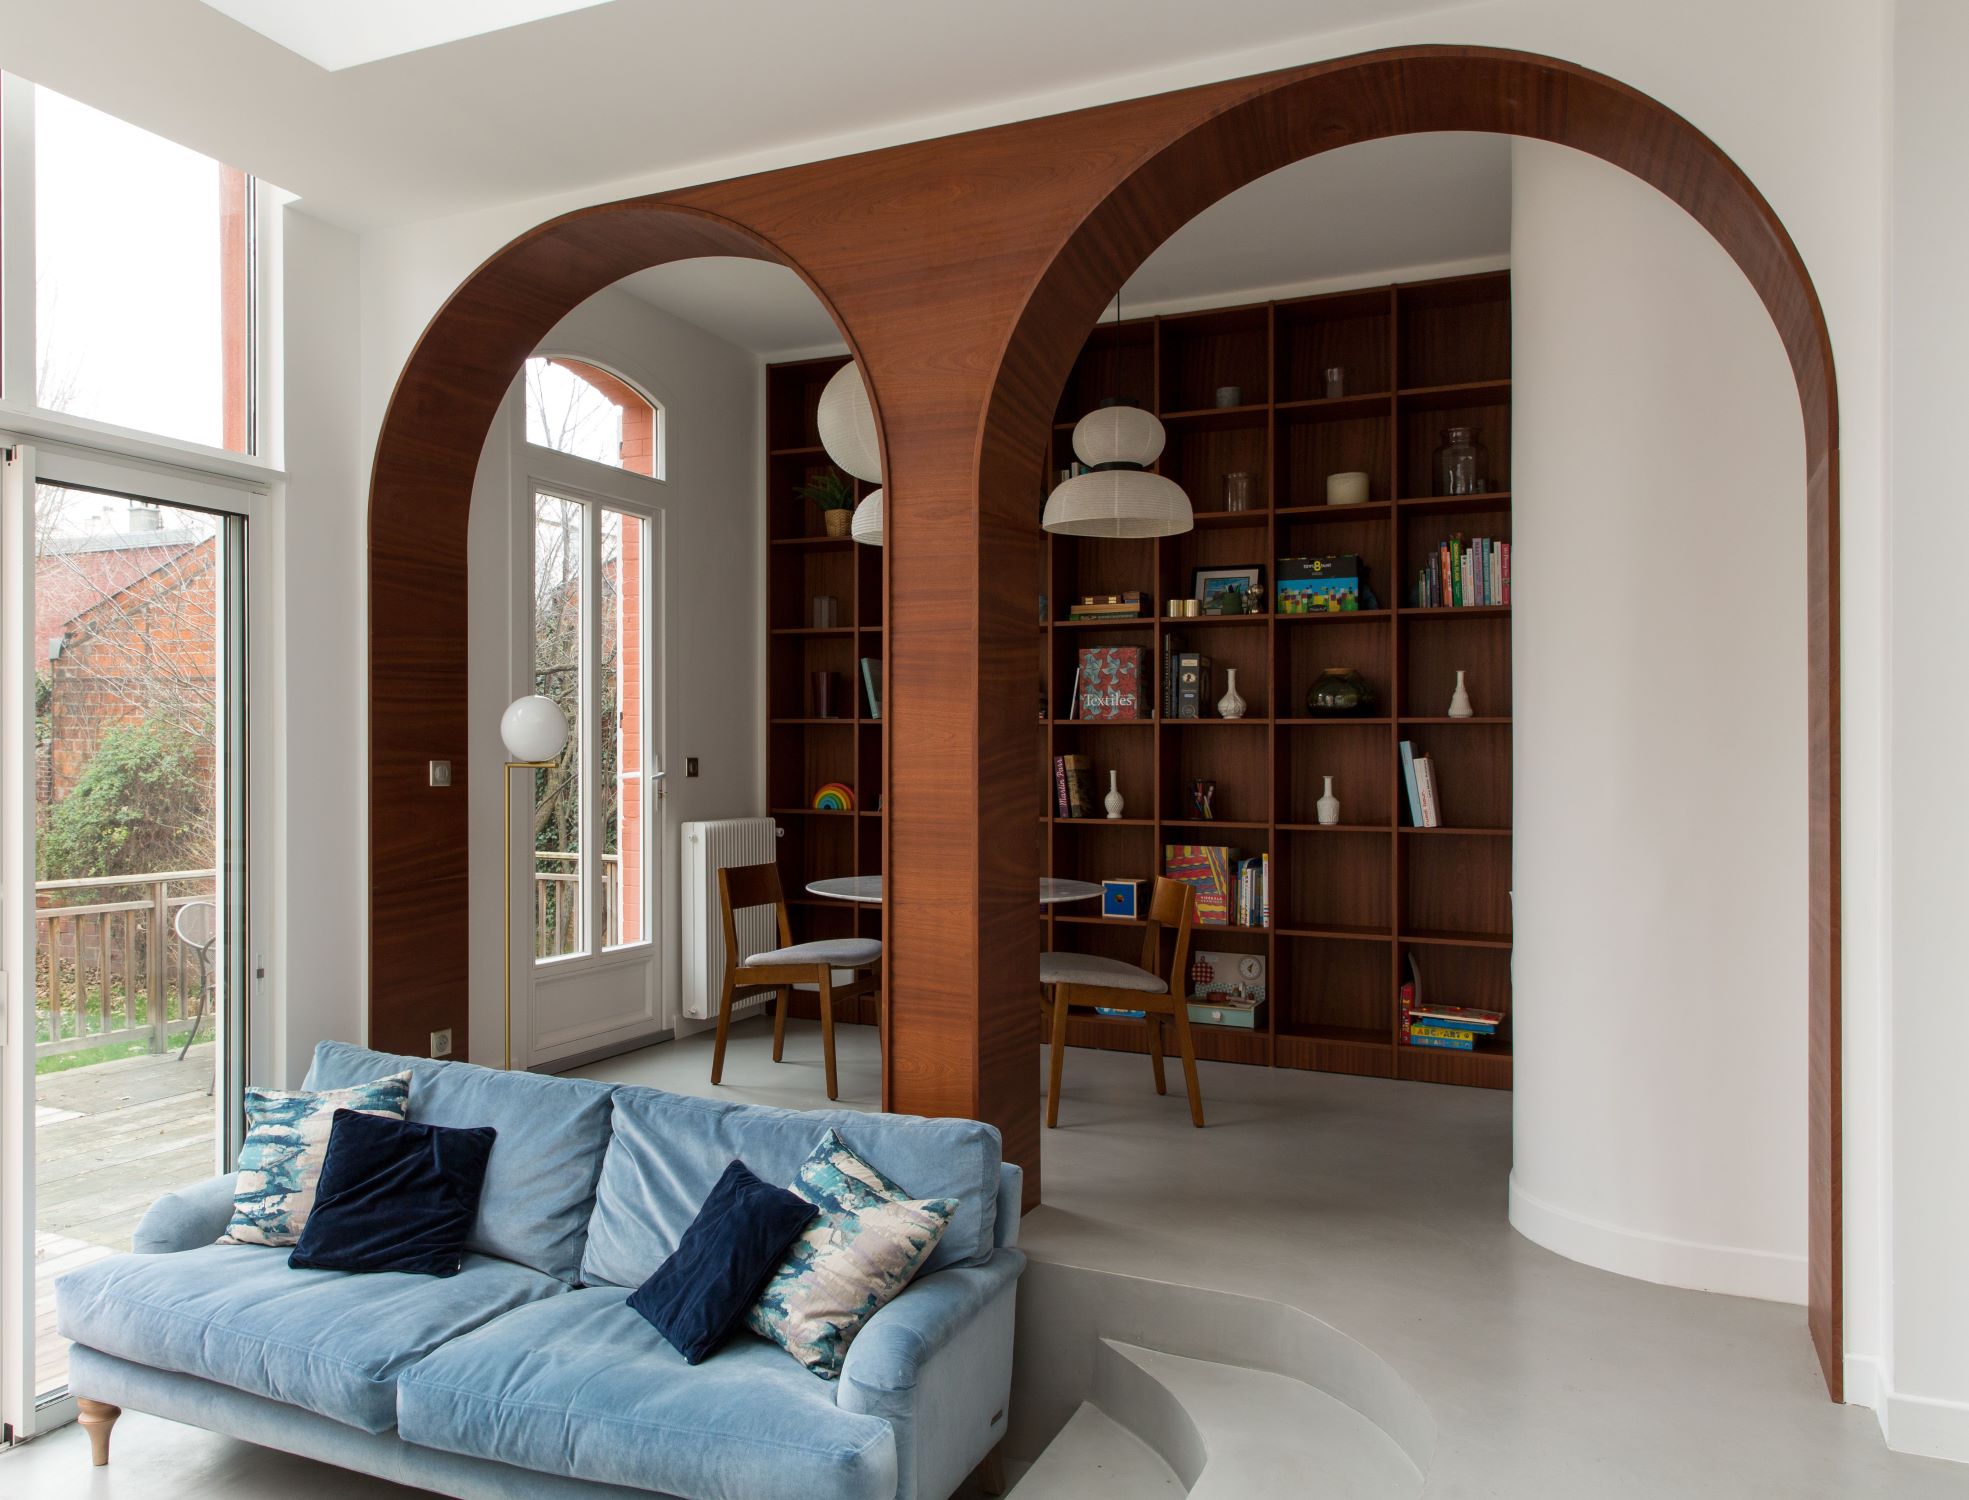 When Did Arches Become Design Features In Houses?